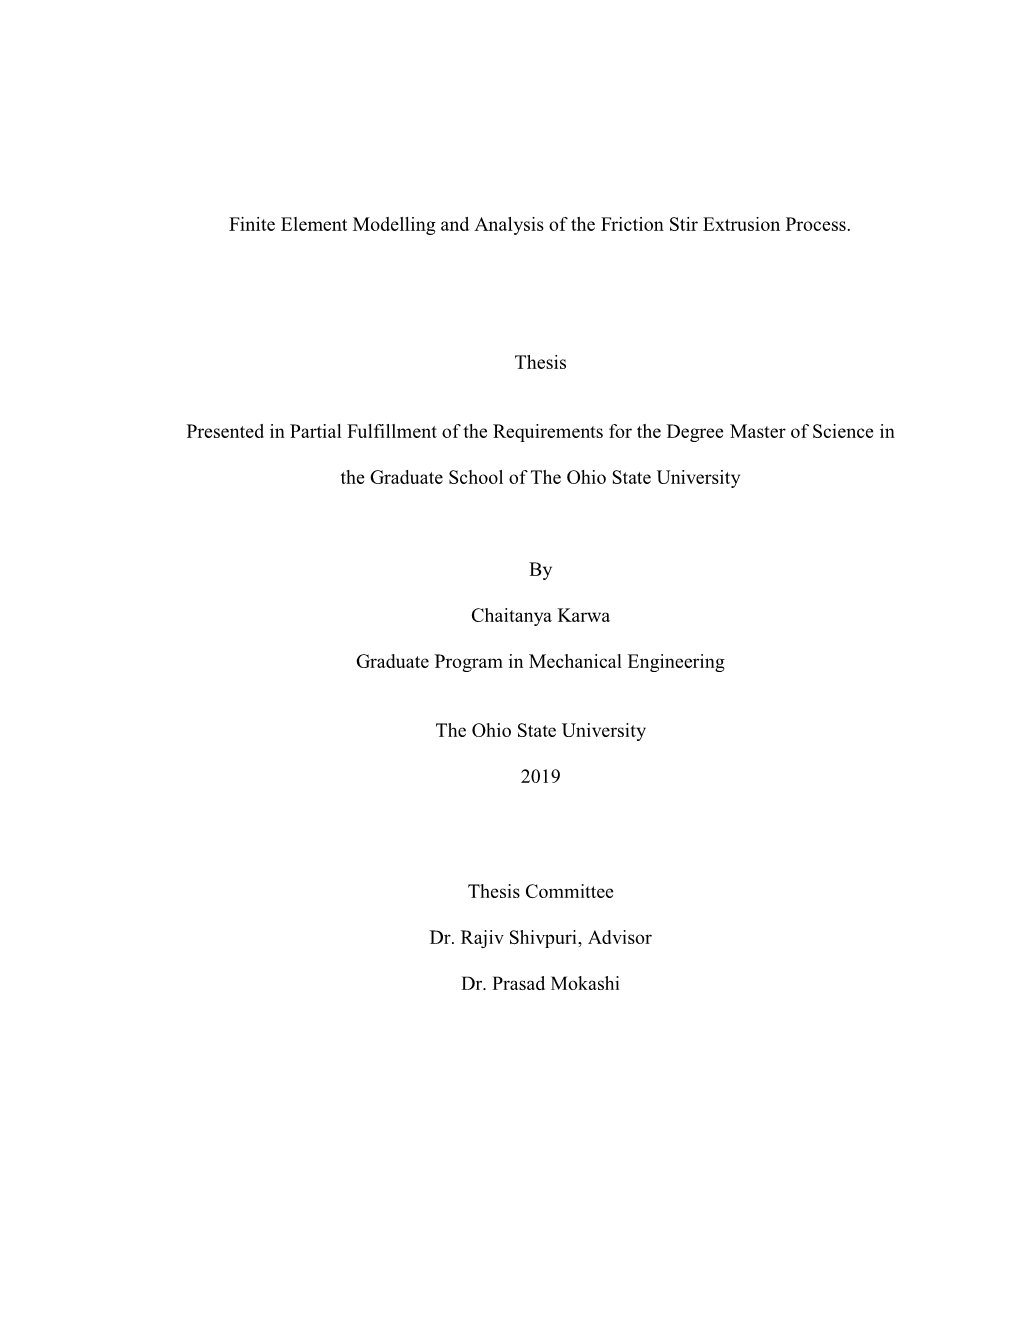 1 Finite Element Modelling and Analysis of the Friction Stir Extrusion Process. Thesis Presented in Partial Fulfillment of the R